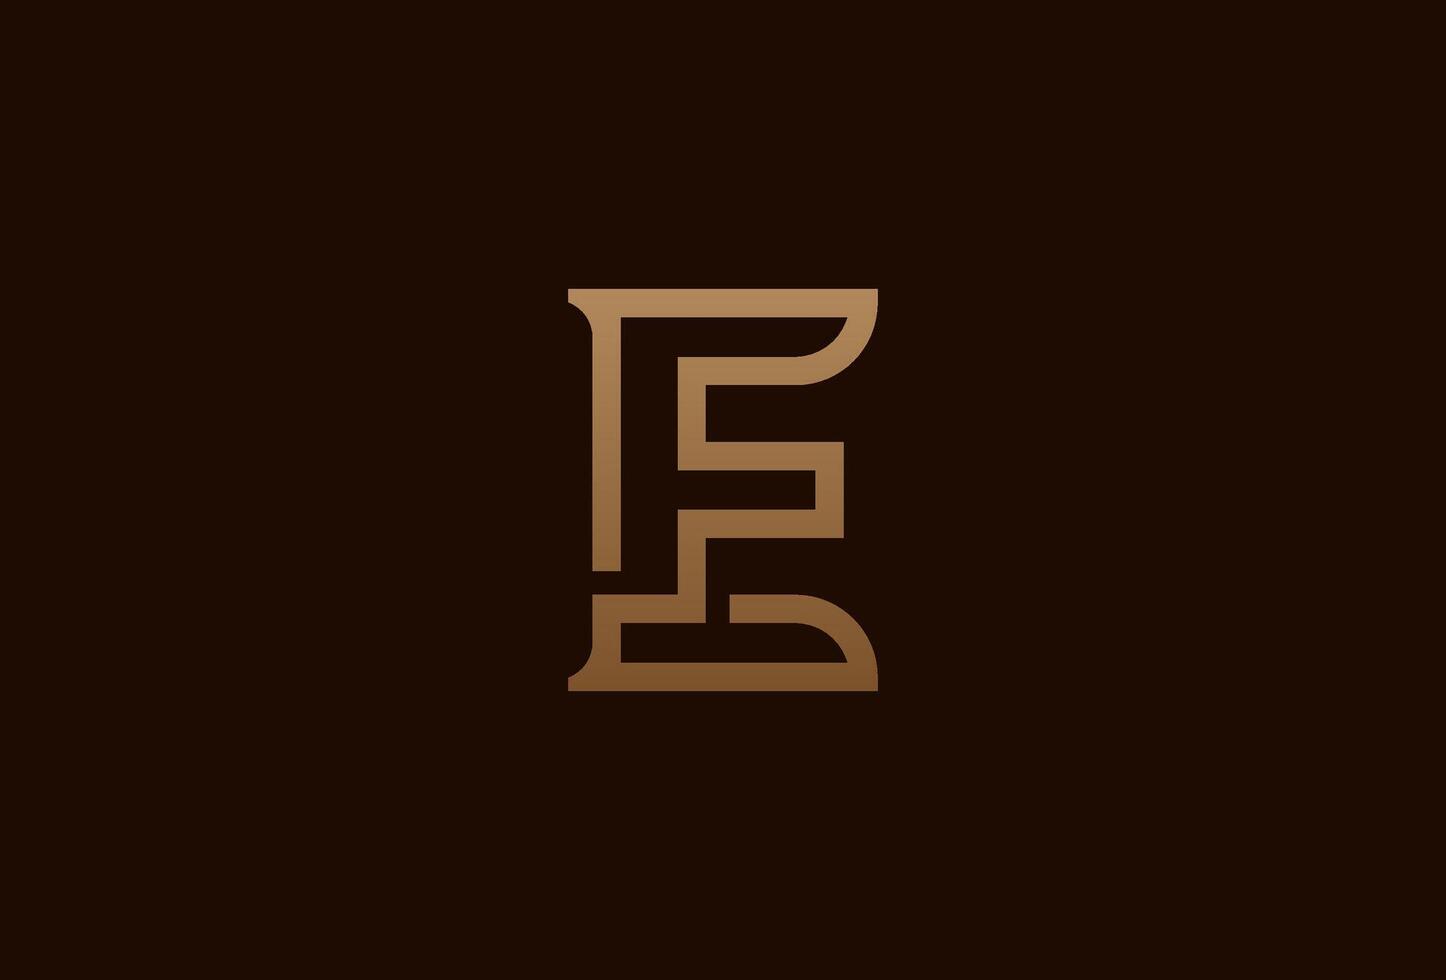 initial EF or FE logo, monogram logo design combination of letters E and F in gold color, usable for brand and business logos, flat design logo template element, illustration vector